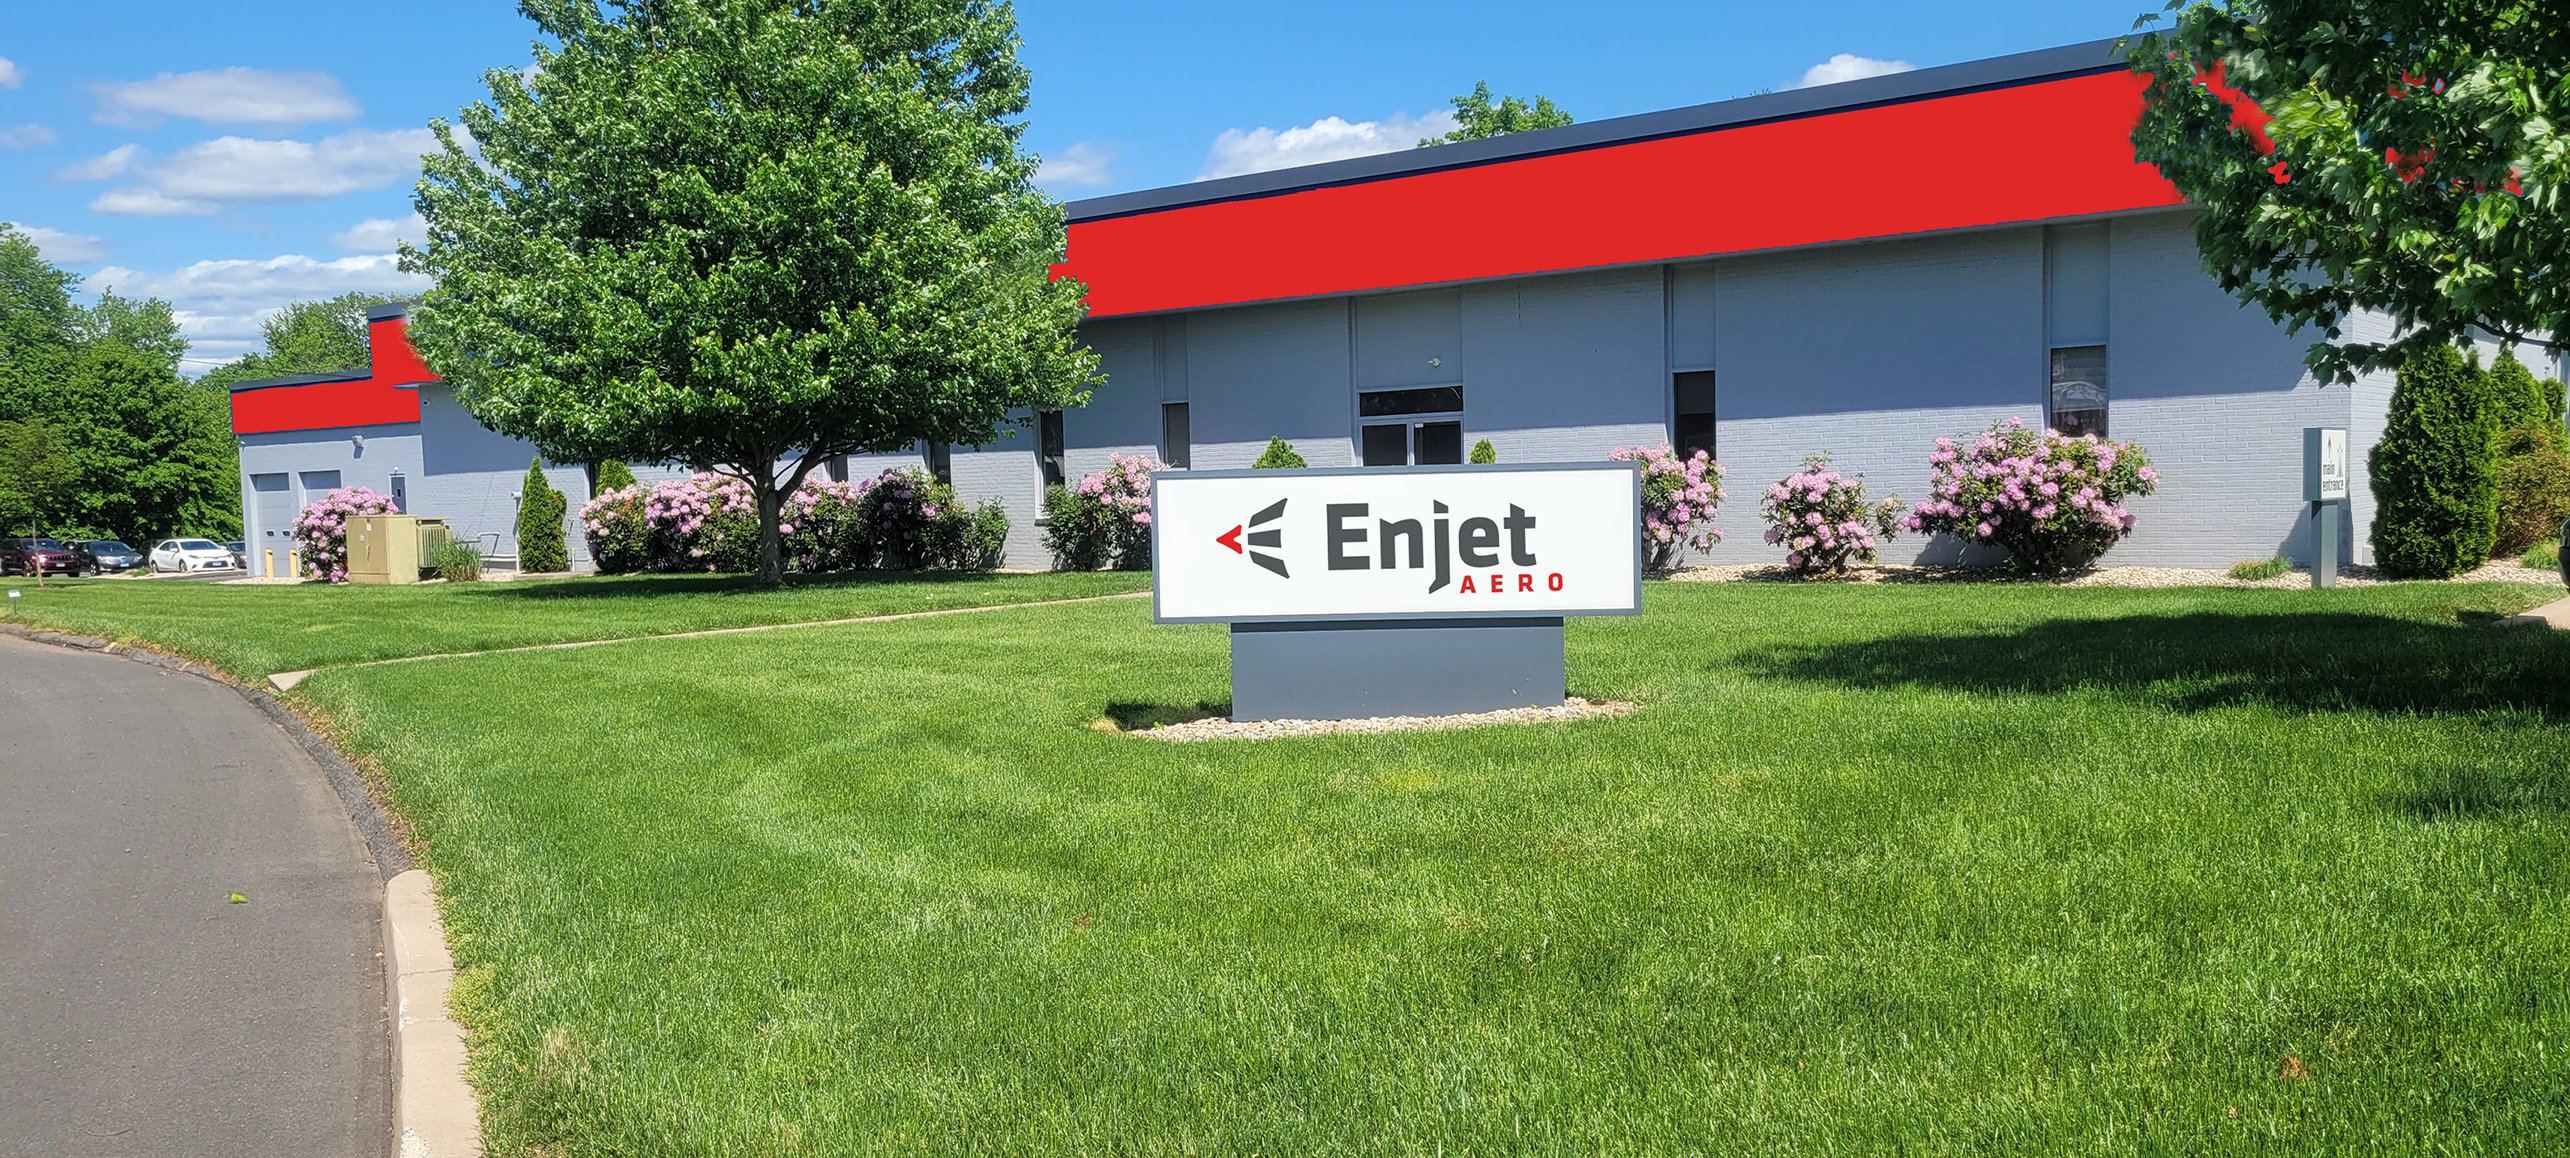 Enjet Aero Completes Acquisition of Integral Industries, Inc.